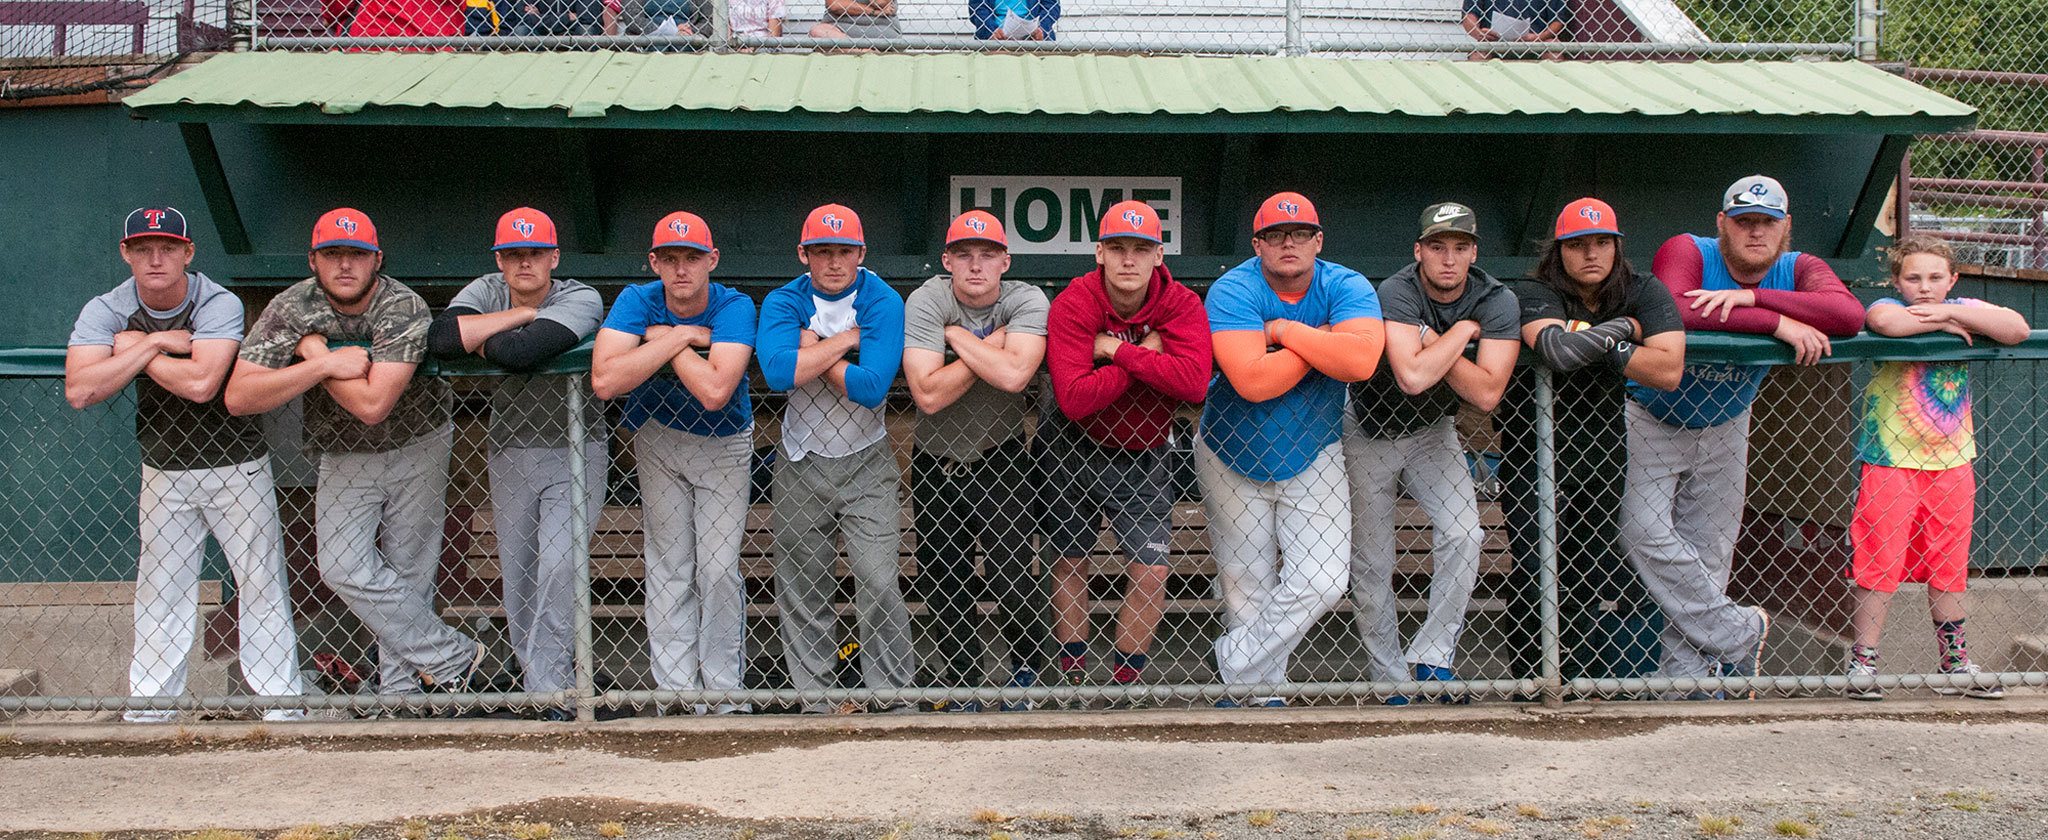 (Brendan Carl | The Daily World, file) Grays Harbor Longshore’s, left to right, Aidan Arrington, Kolby Standstipher, Chase McCarthy, Brandon Rogers, Jake Herzog, Justin Spencer, Jace Varner, Oscar Escalante, Camden Anderson, Austin Silva, Kyle Standstipher and bat kid Emmie Spencer line up on the top step of the dugout before practice at Olympic Stadium. The Senior Babe Ruth baseball team was the first Harbor-based team to win a Senior Babe Ruth regional pennant and was honored as The Daily World’s Team of the Year for 2016.